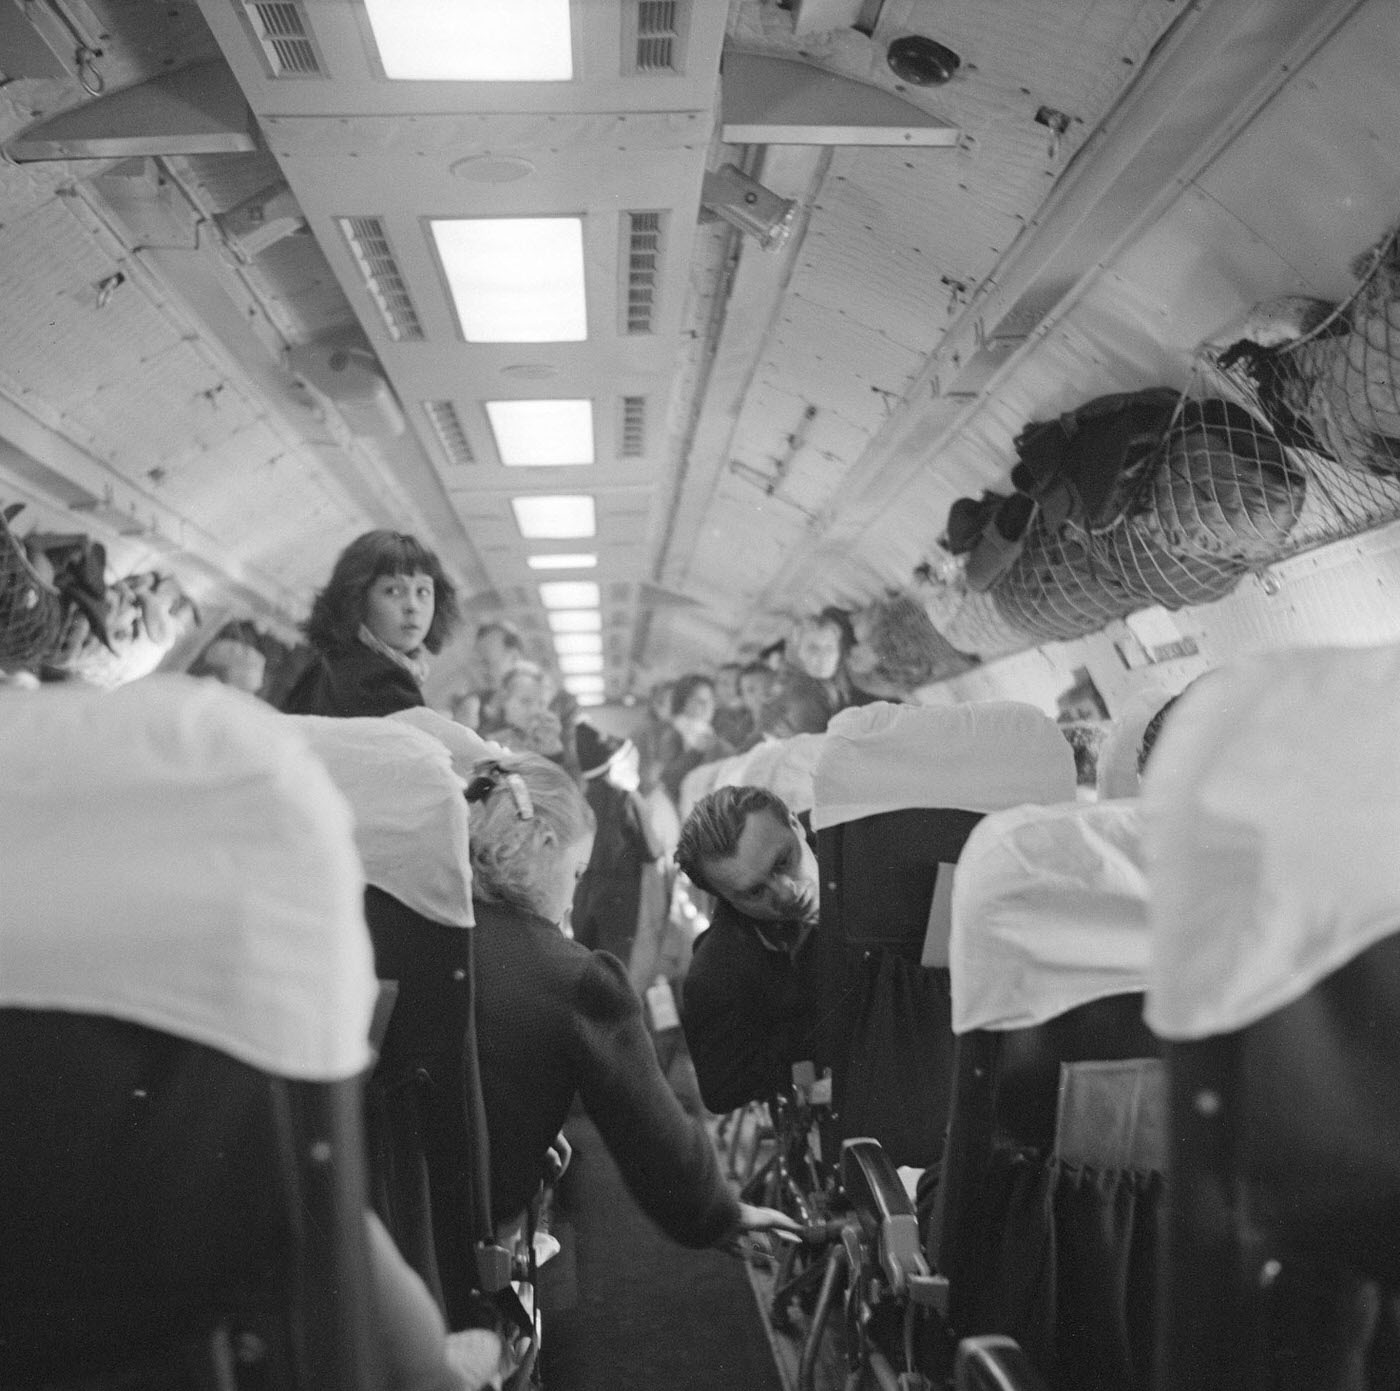 In 1957, a view of airline passengers is seen along the center aisle of a plane. Many of the passengers are refugees from the failed Hungarian Revolution and are on their way to the United States.